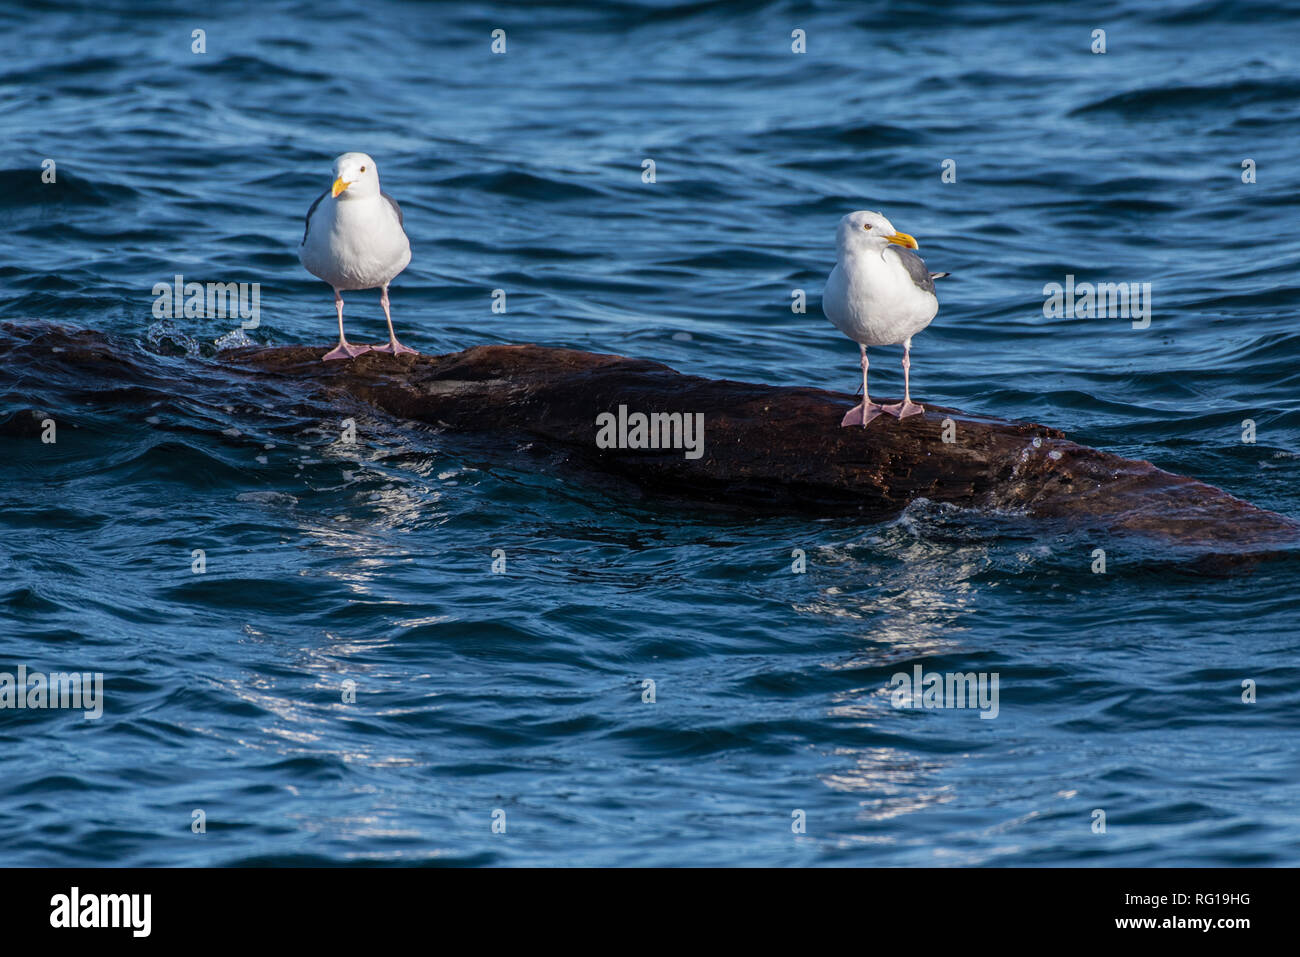 Pair of seagulls sharing a floating log and remaining dry while out in the Pacific Ocean. Stock Photo